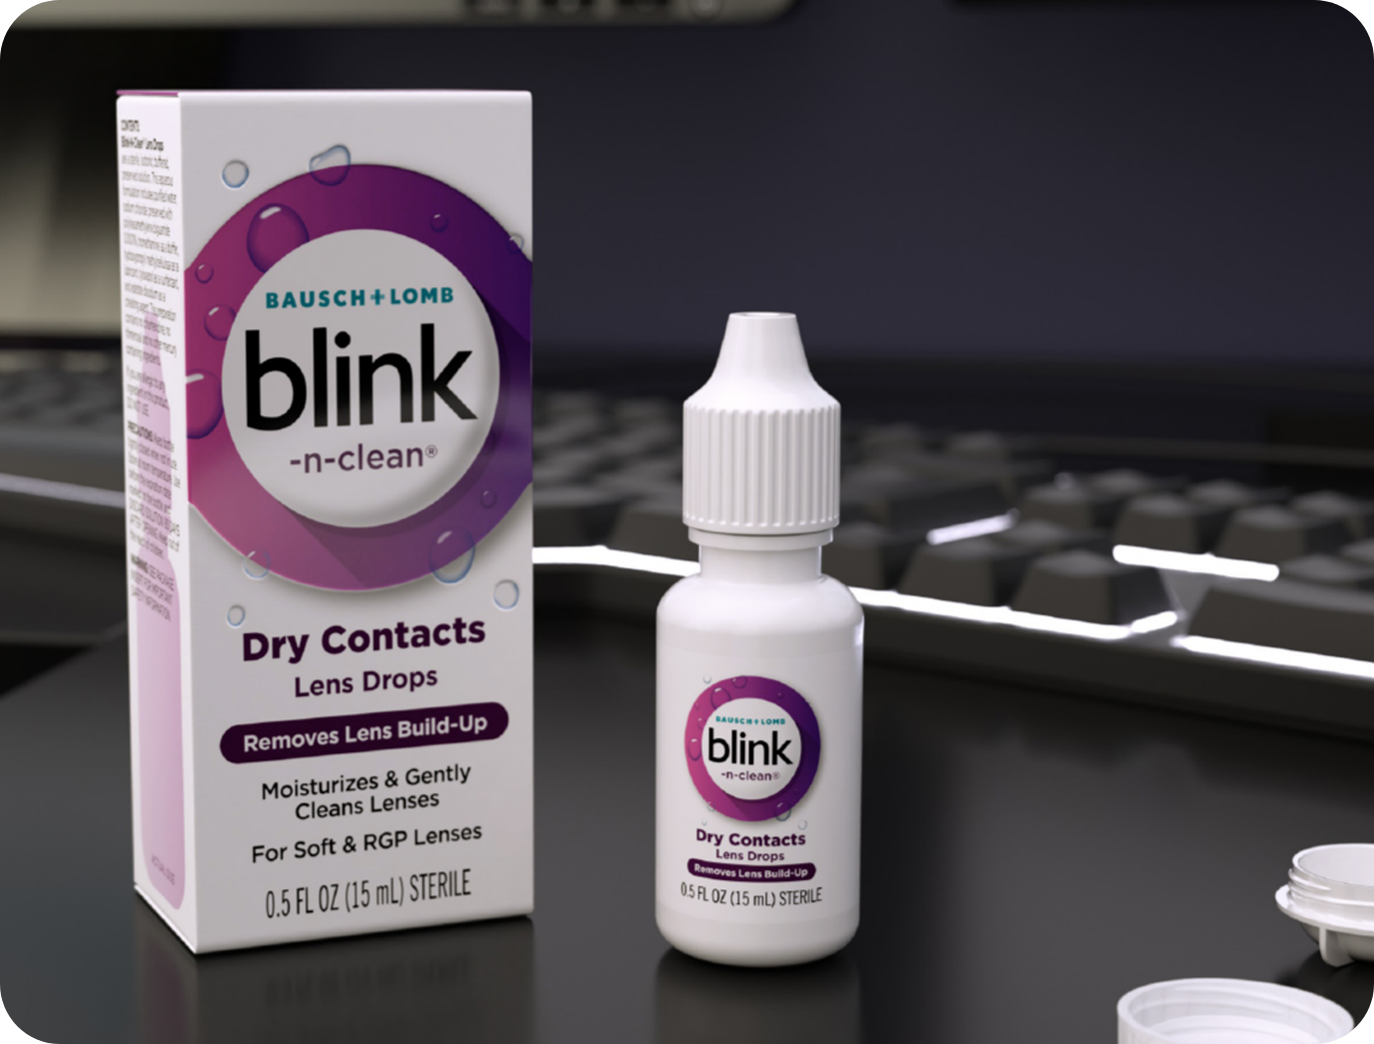 Blink-N-Clean Lens Drops bottle and carton on a desk in front of a keyboard